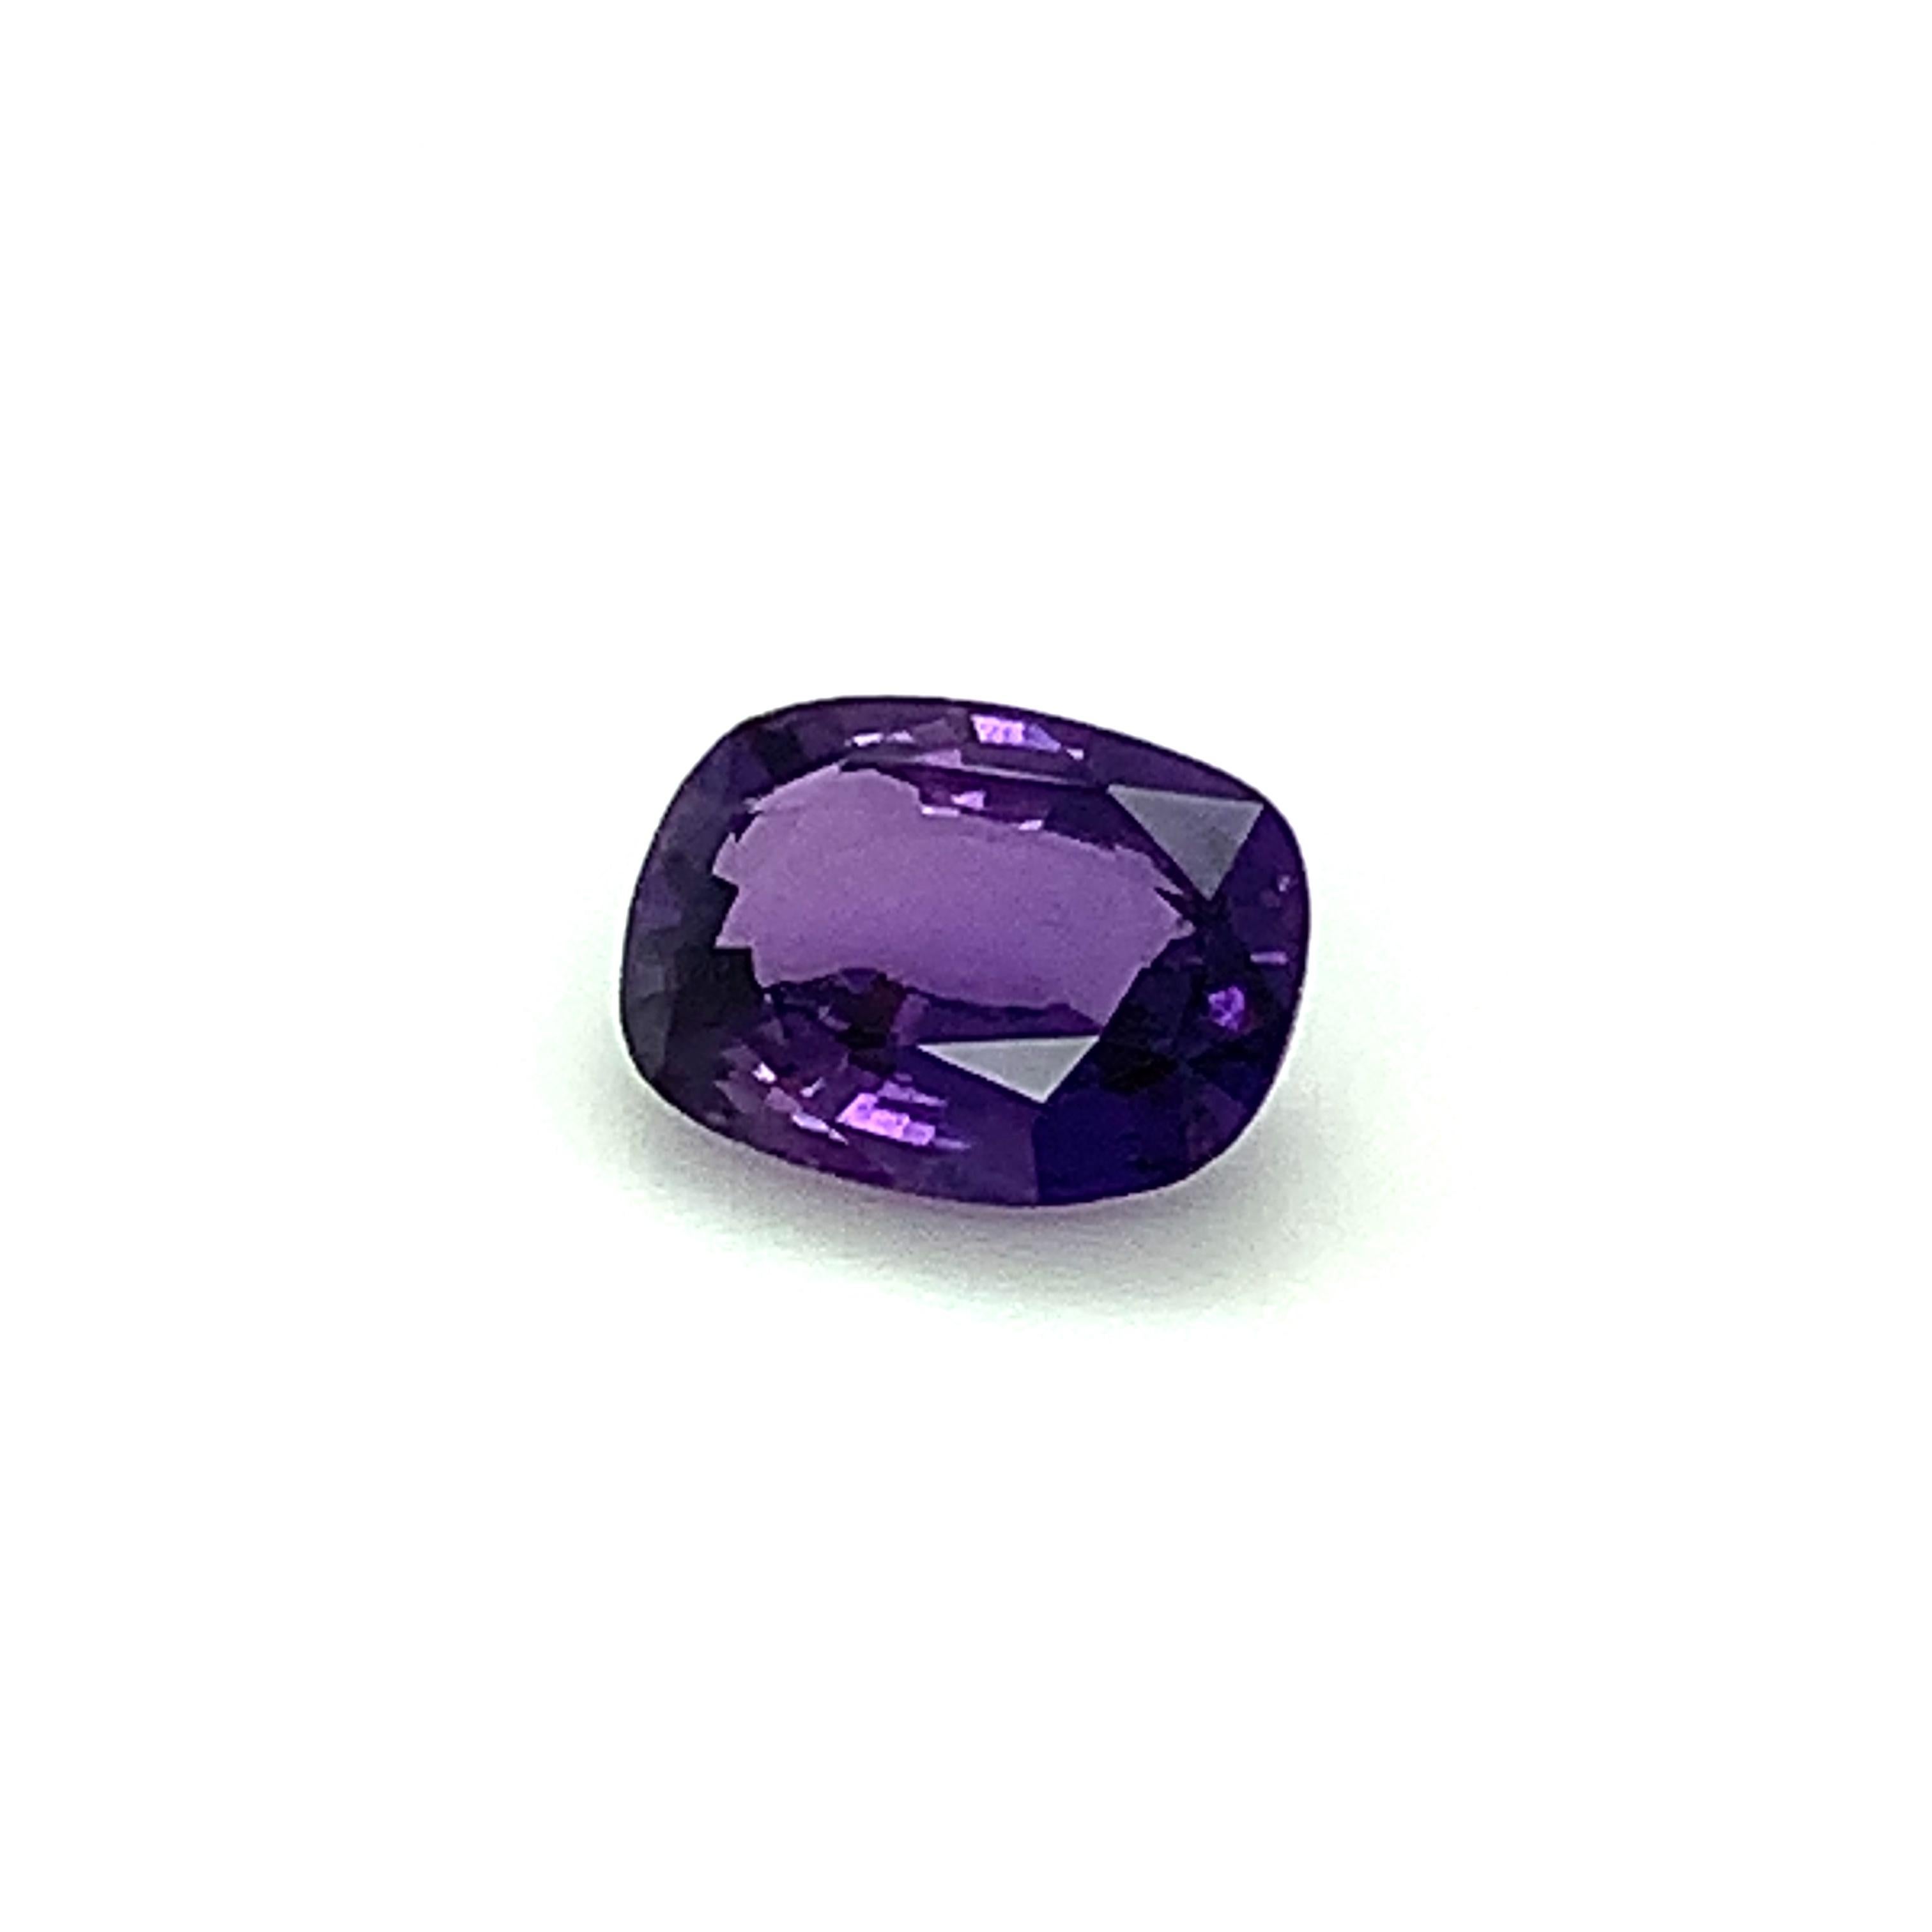 Unheated 3.50 Carat Color Change Sapphire, Unset Loose Gemstone, GIA Certified 5